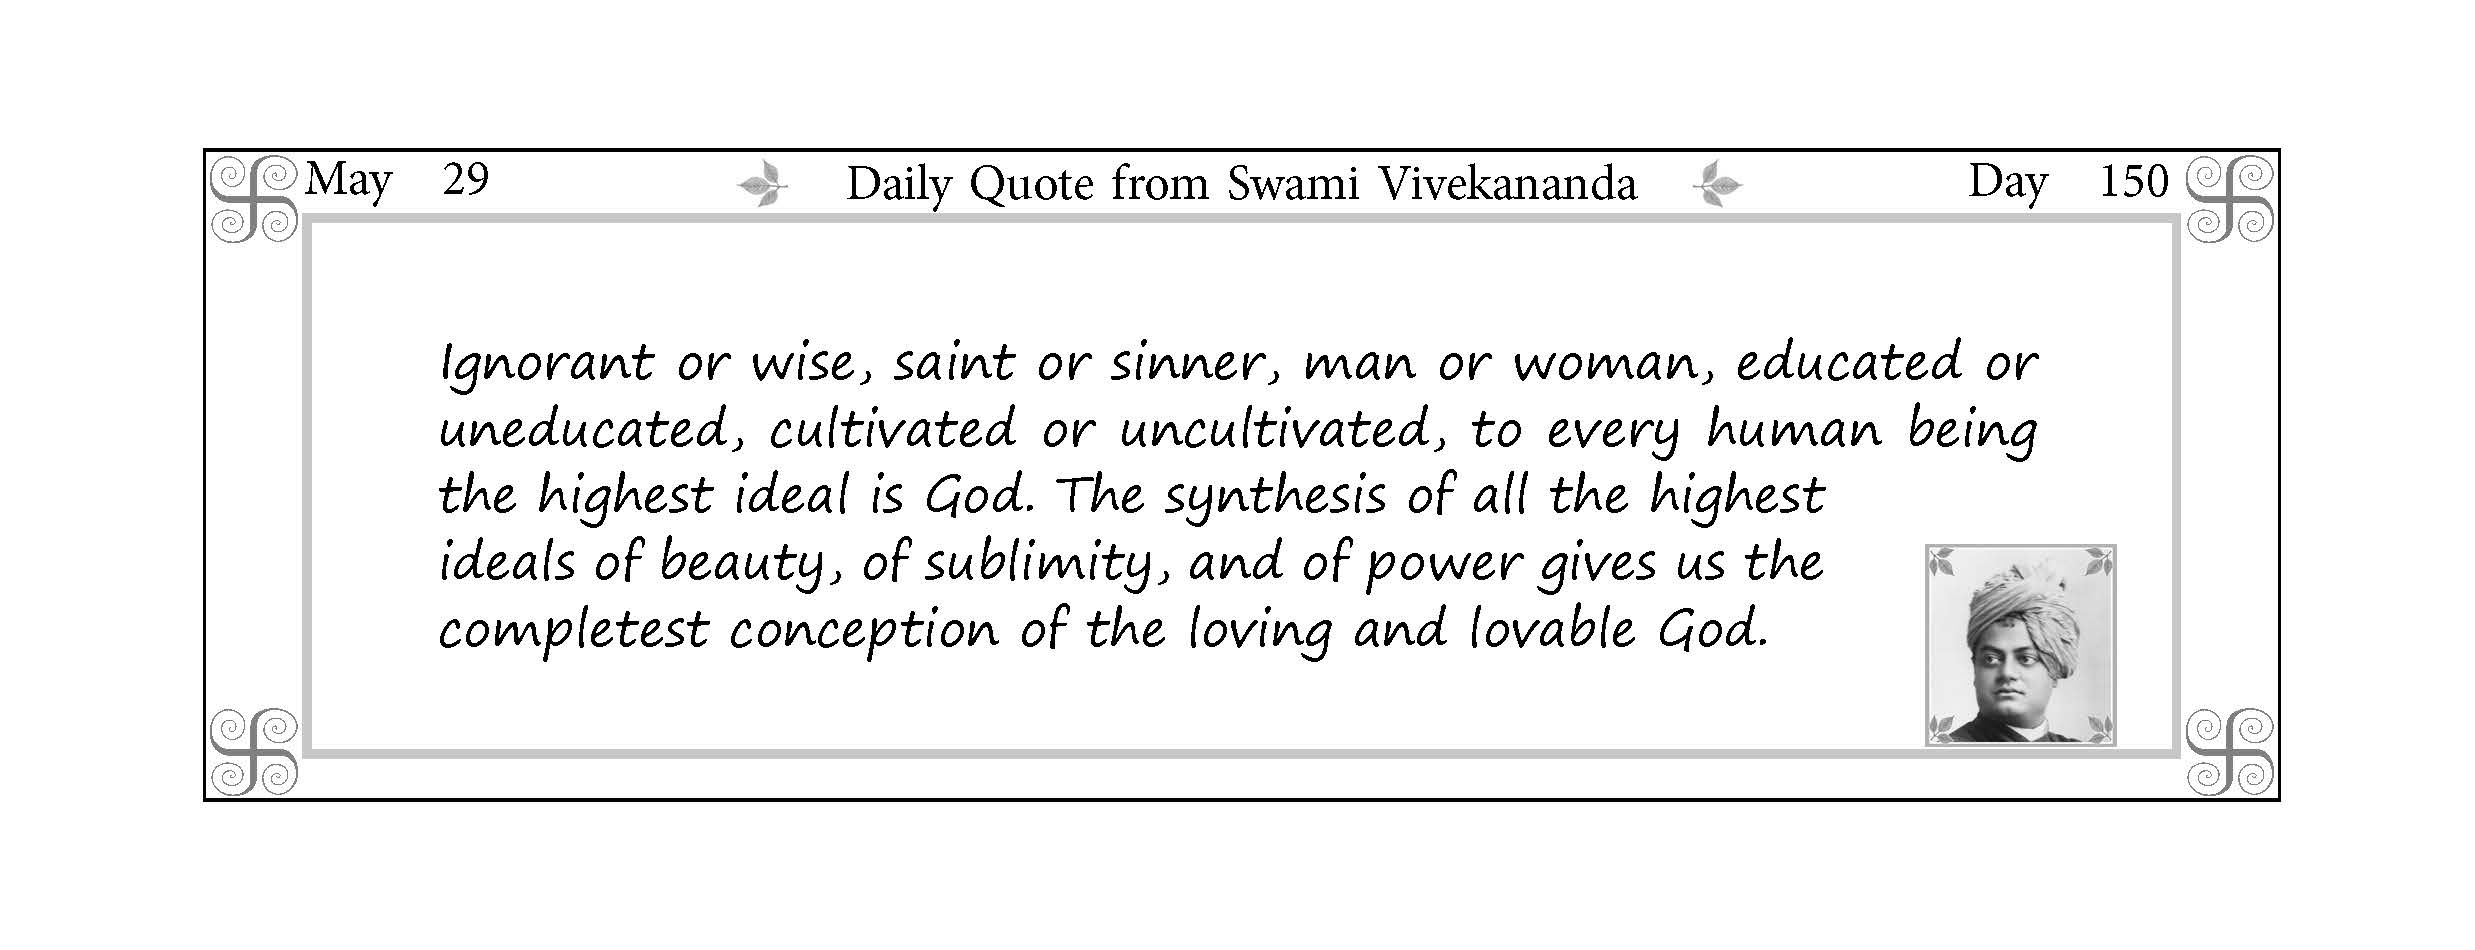 Rousing Dawn - Daily Quote from Swami Vivekananda